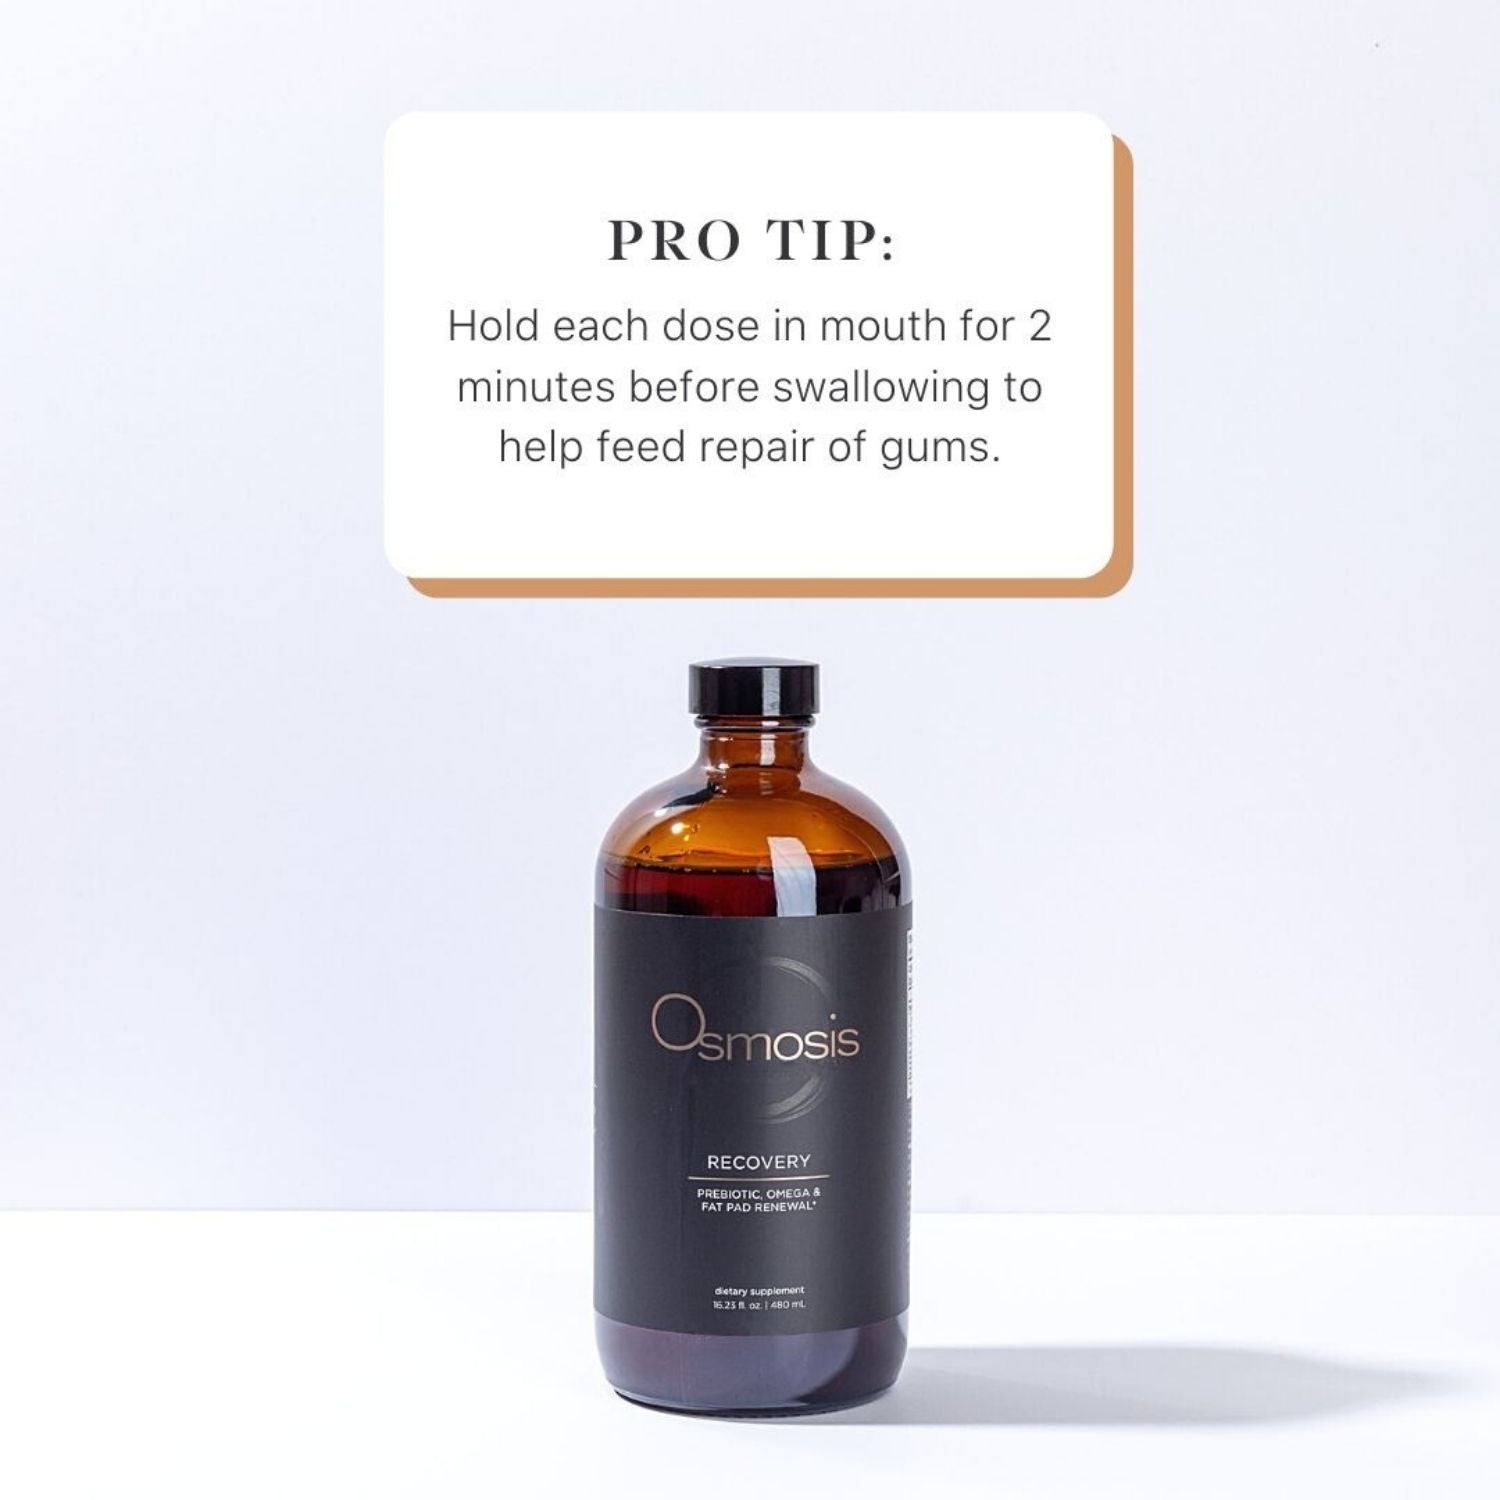 bottle of recovery prebiotic displayed with a pro tip text on white background